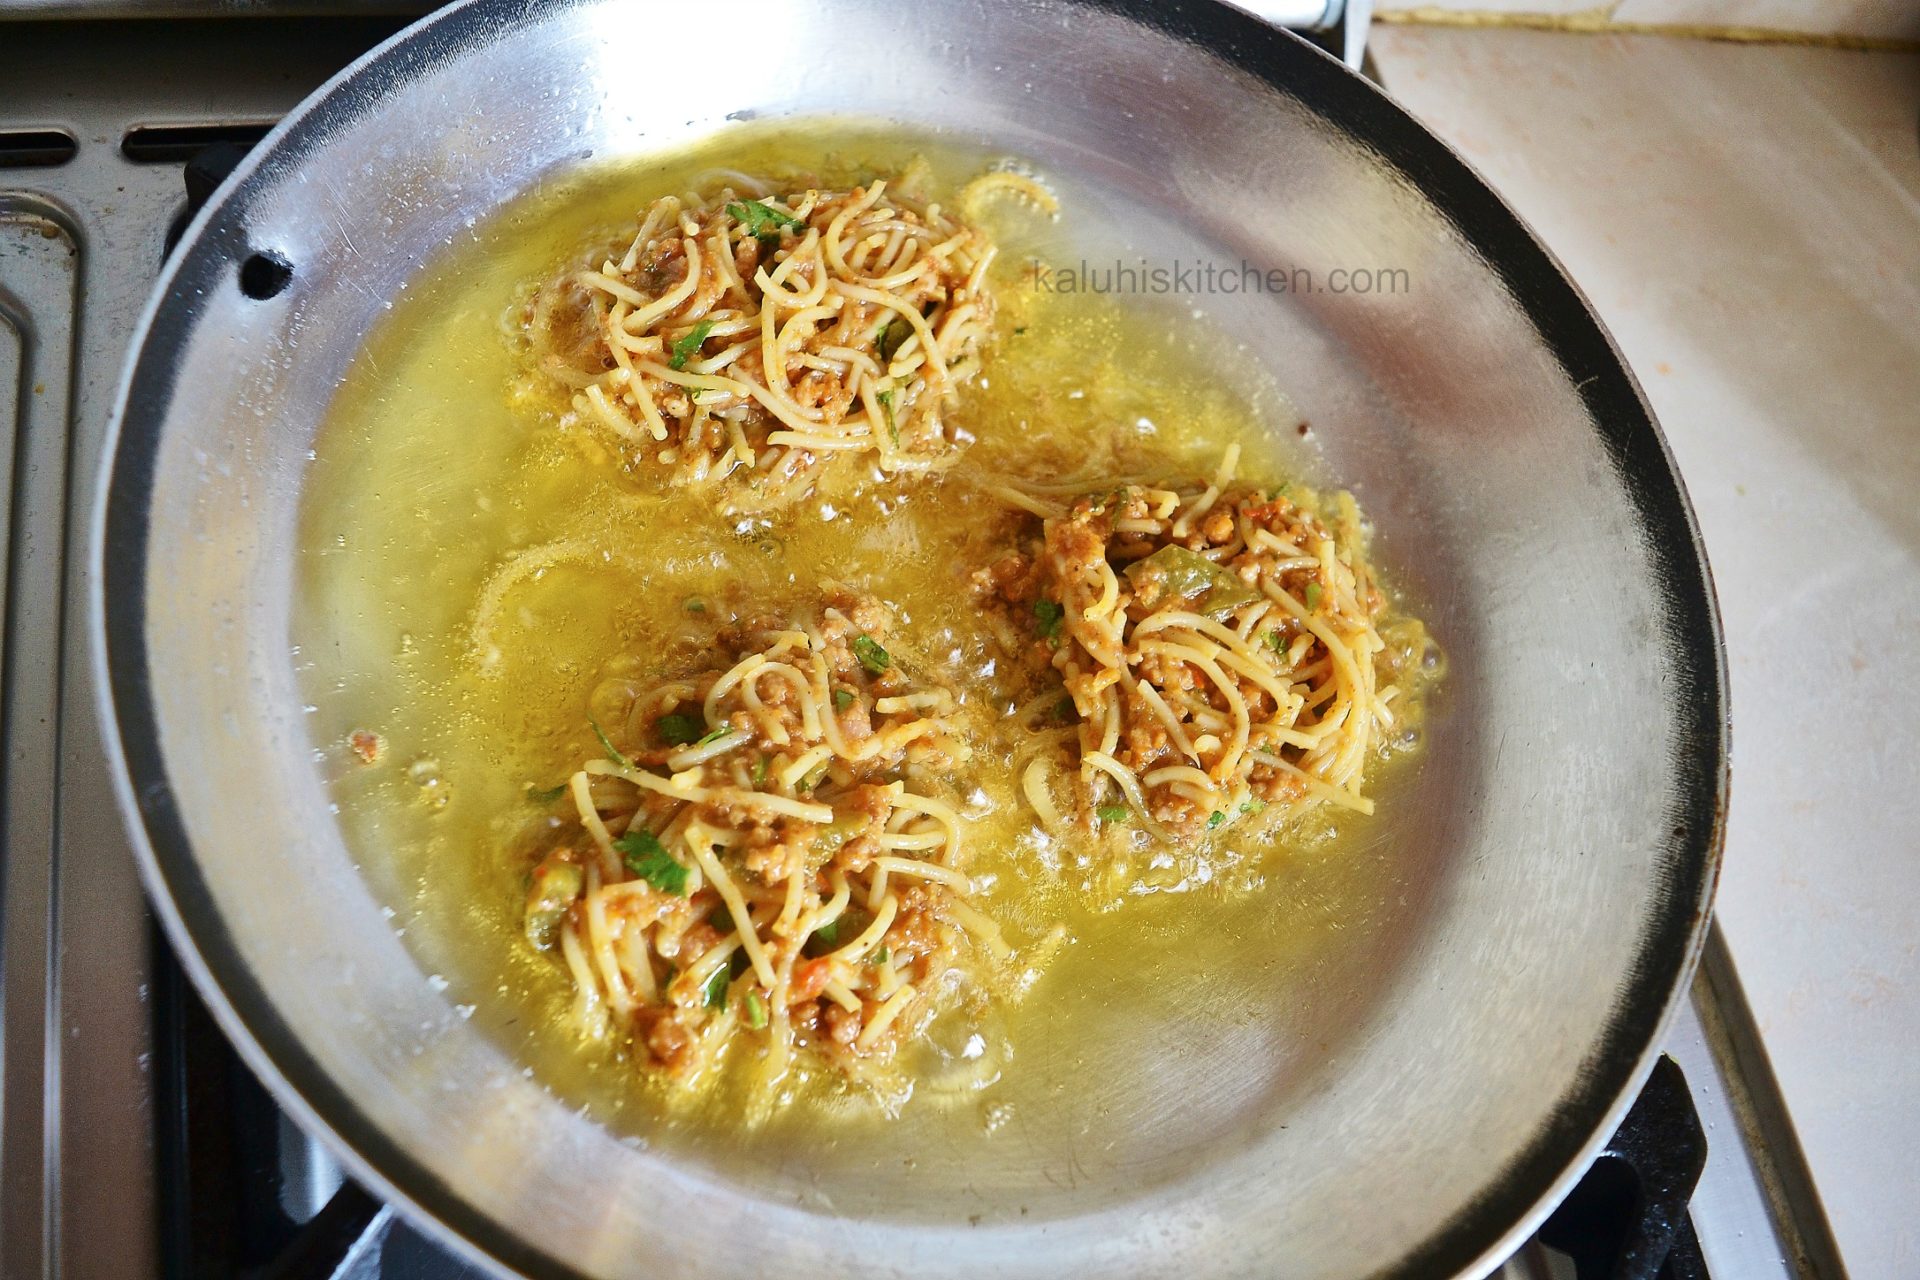 fry the fritters in some oil, not to much but enough to fry_kaluhiskitchen.com